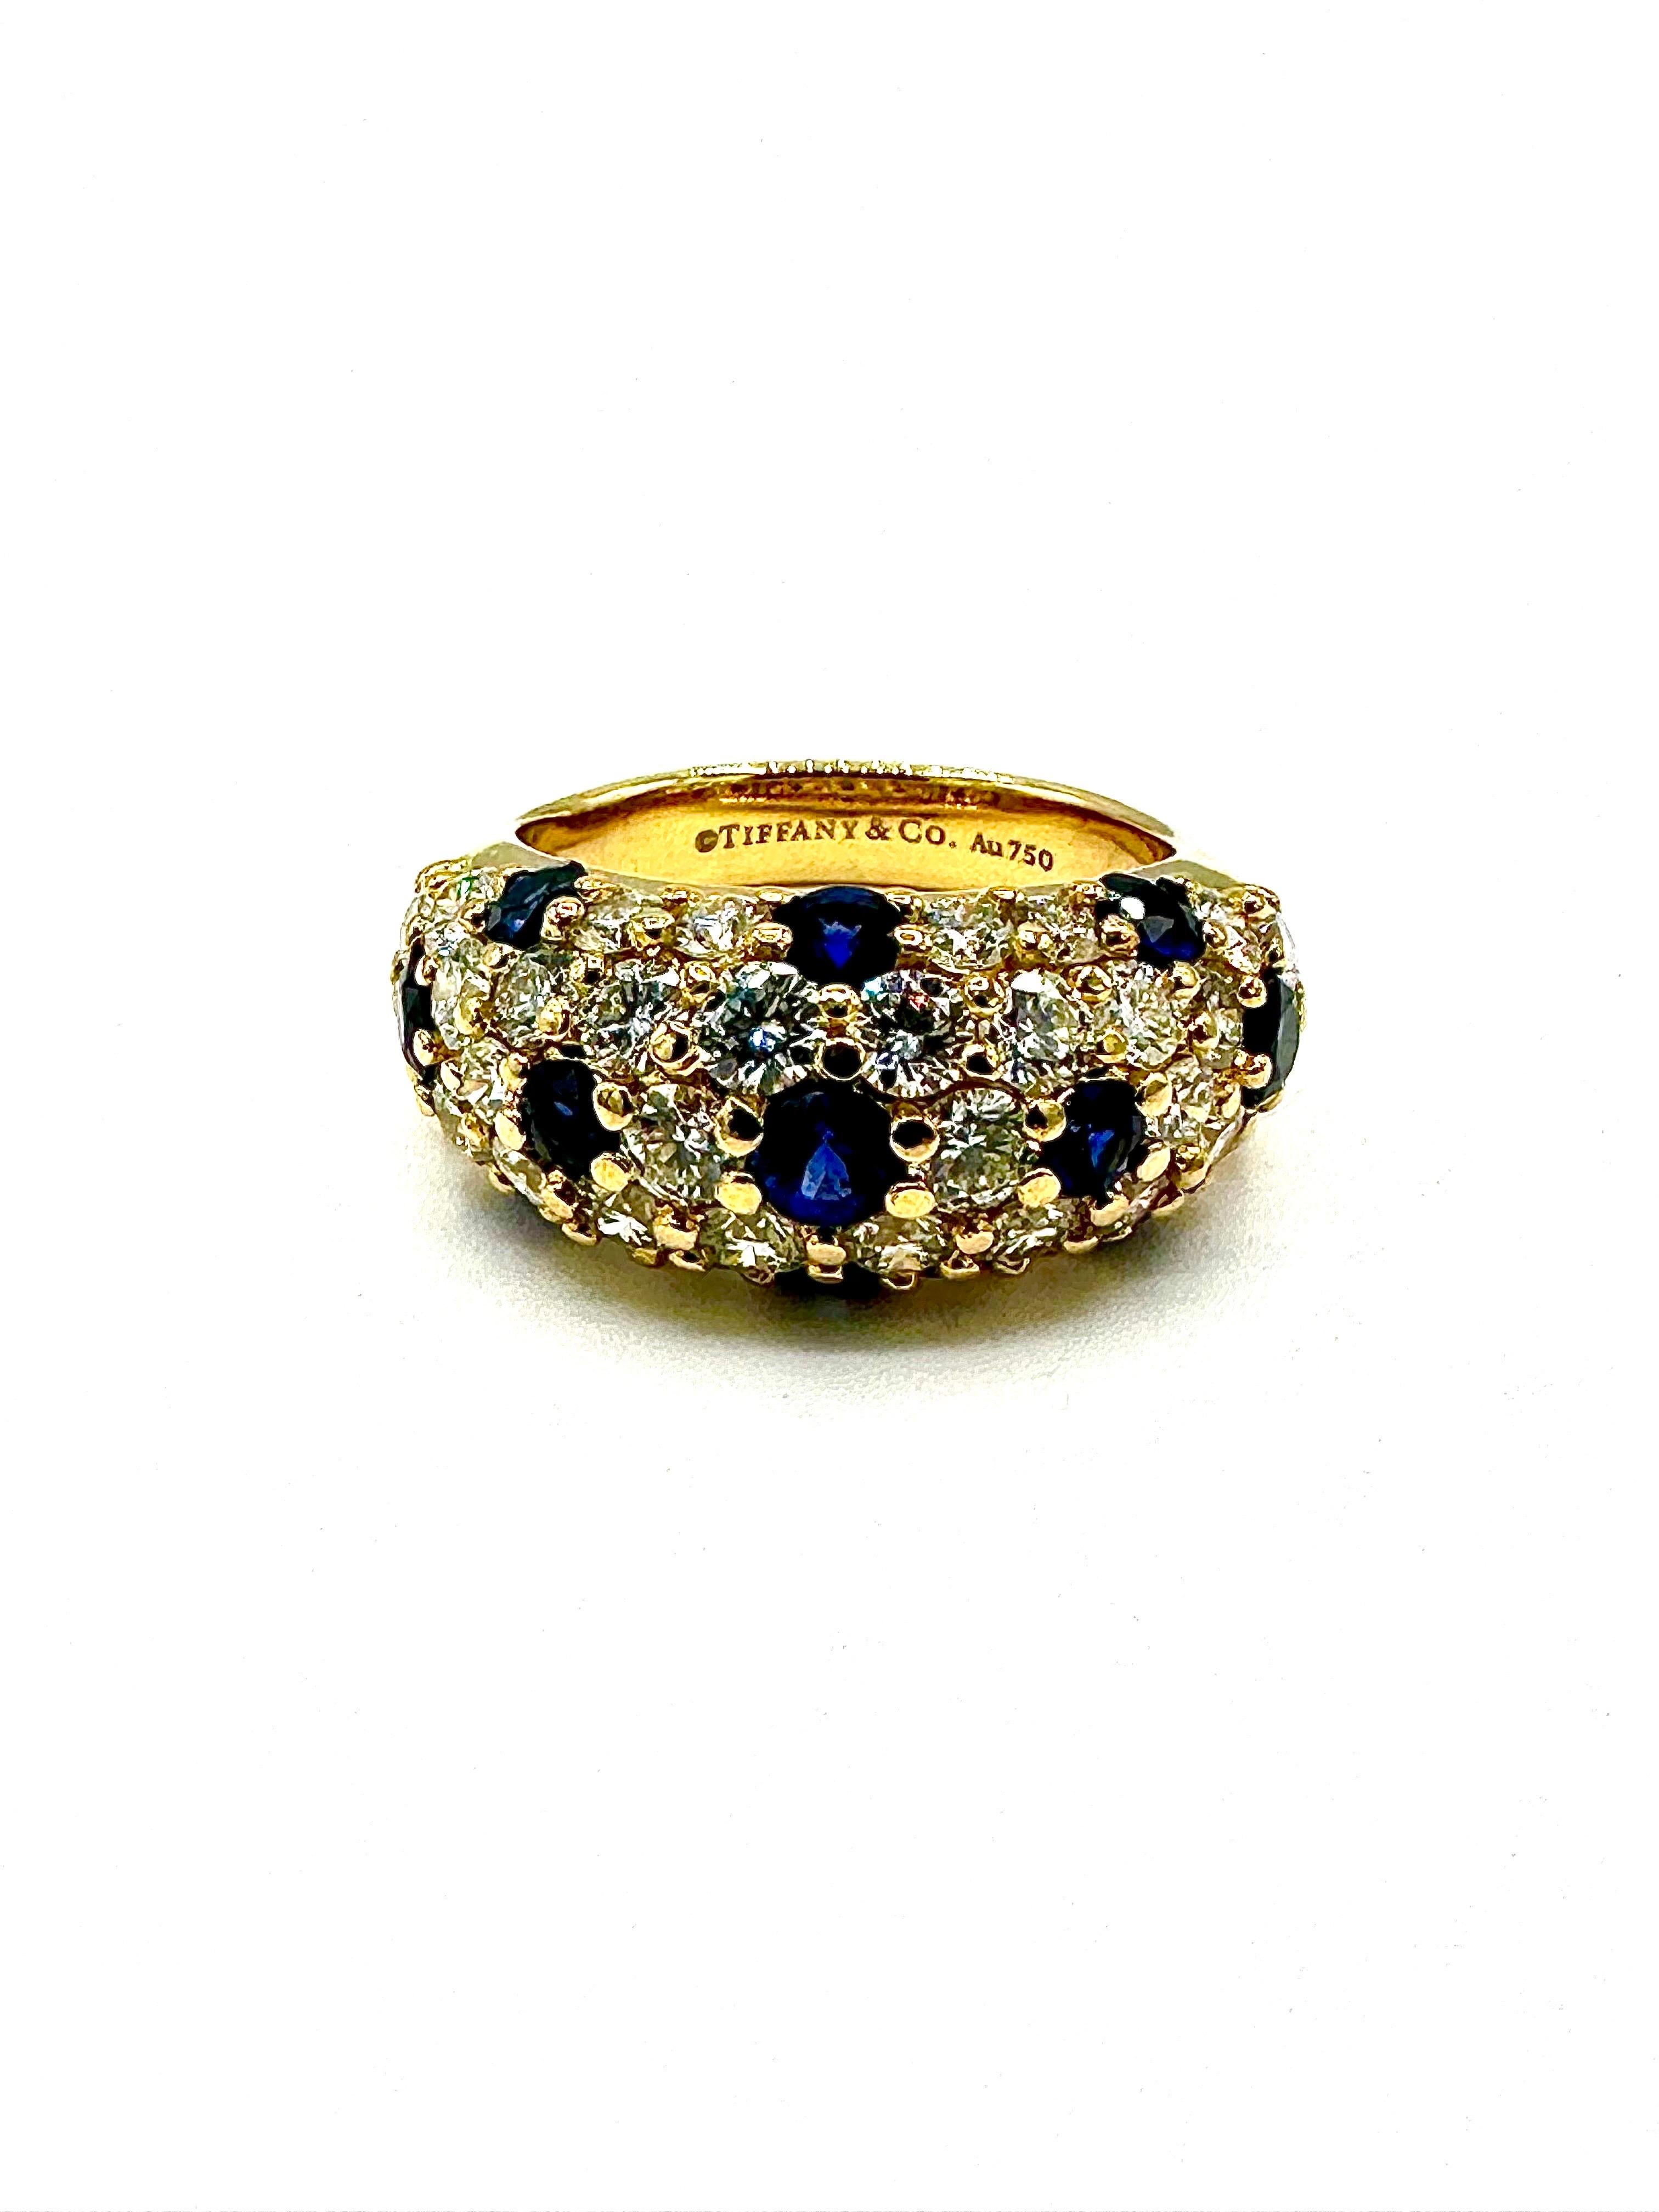 A gorgeous Tiffany & Co. Bombe style Diamond and Sapphire band ring.  The ring features 33 round brilliant cut Diamonds, with 11 blue Sapphires set throughout the ring.  The Diamonds have a total weight of 1.90 carats, with 0.65 carats in Sapphires,